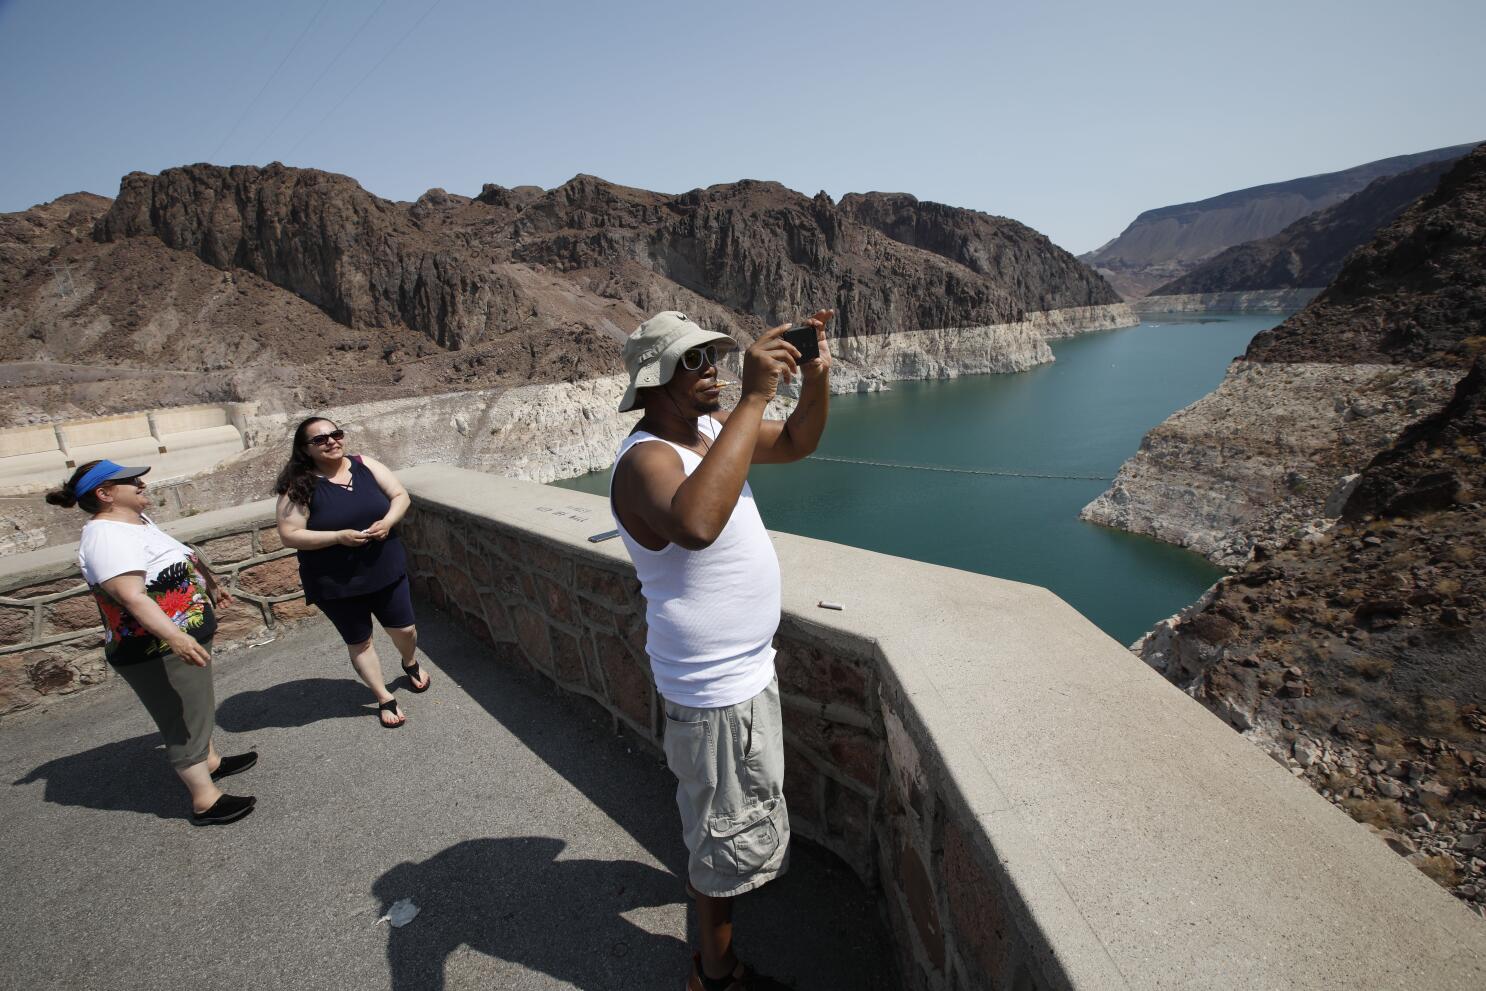 Las Vegas' Growth Tied to its Dwindling Water Supply